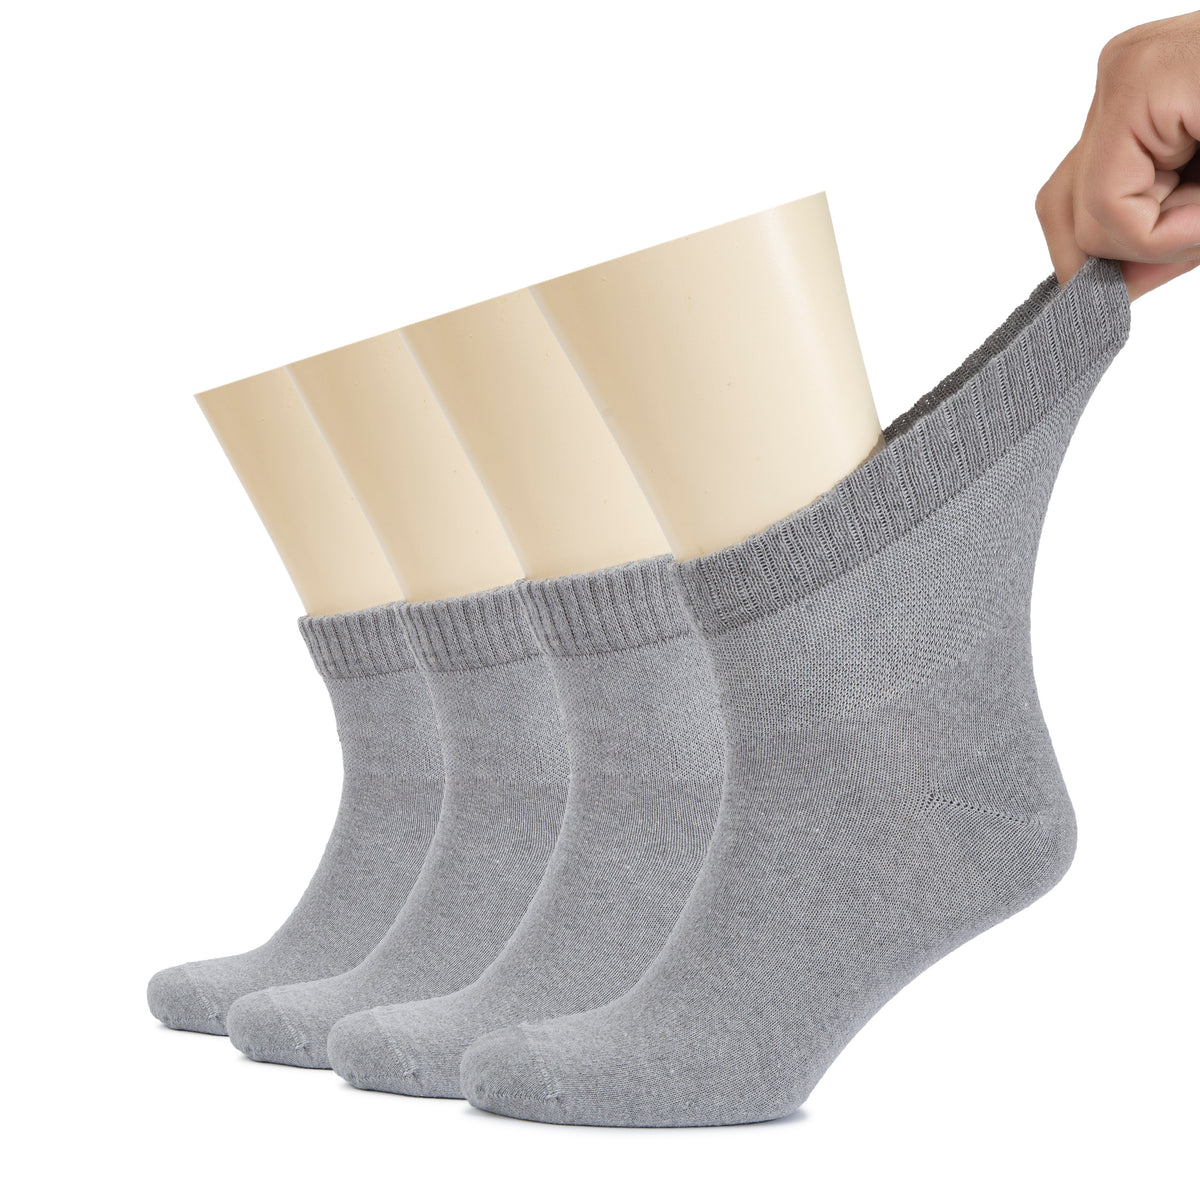 A person is holding a pair of gray Men's Diabetic Ankle Socks, designed to provide comfort and support for those with diabetes or circulation issues.